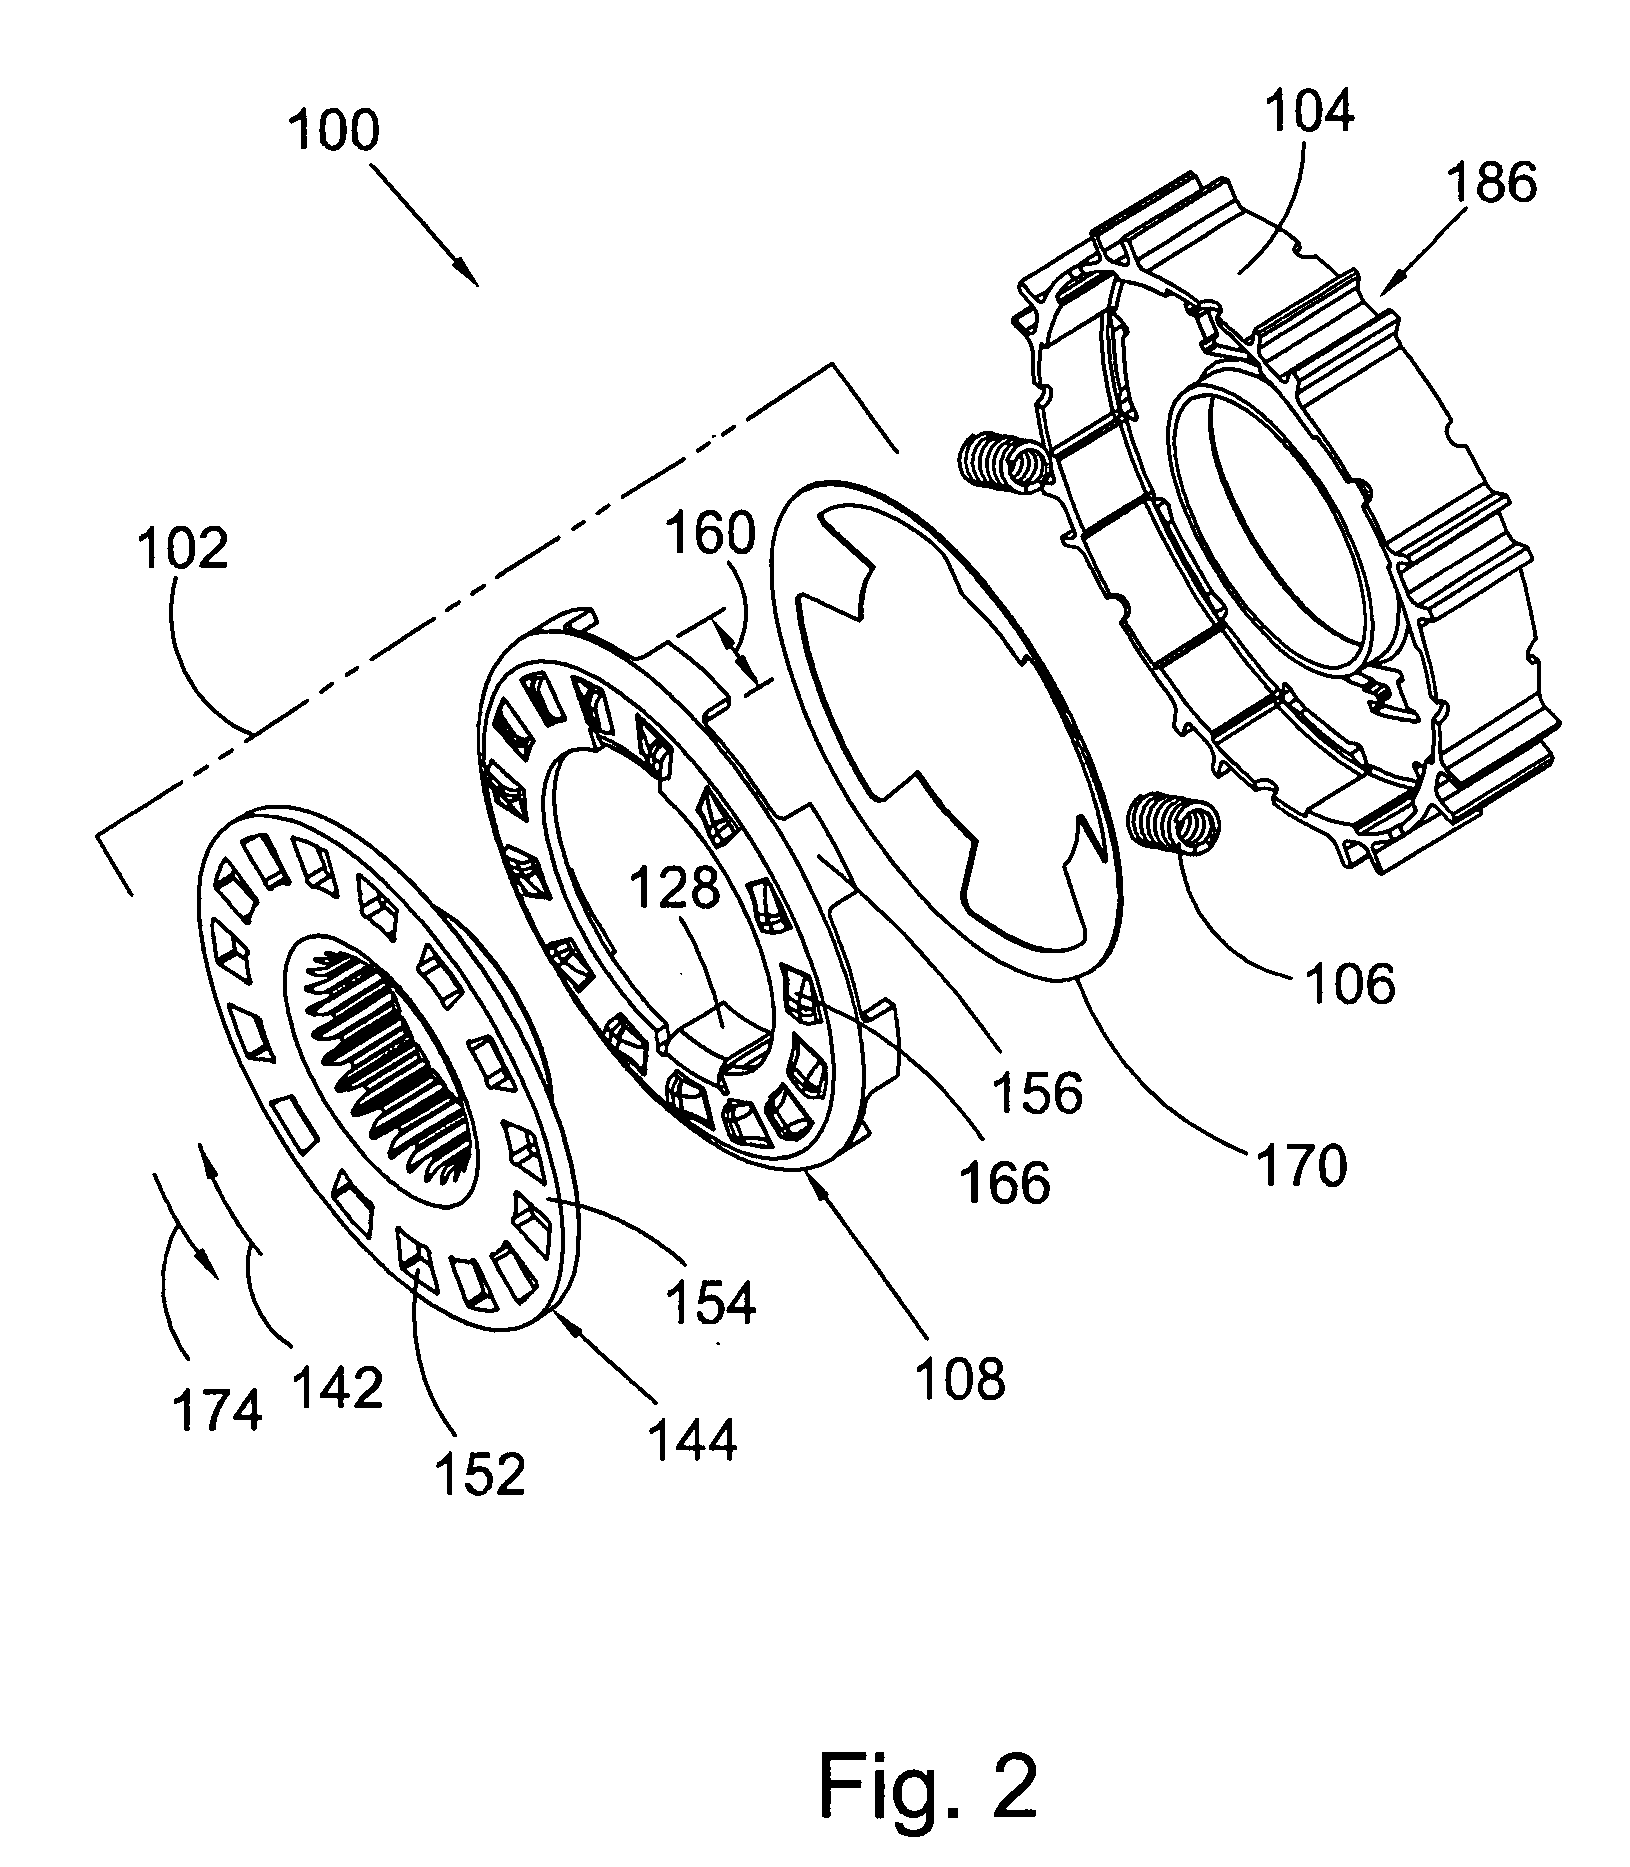 Ratchet one-way clutch with vibration dampening